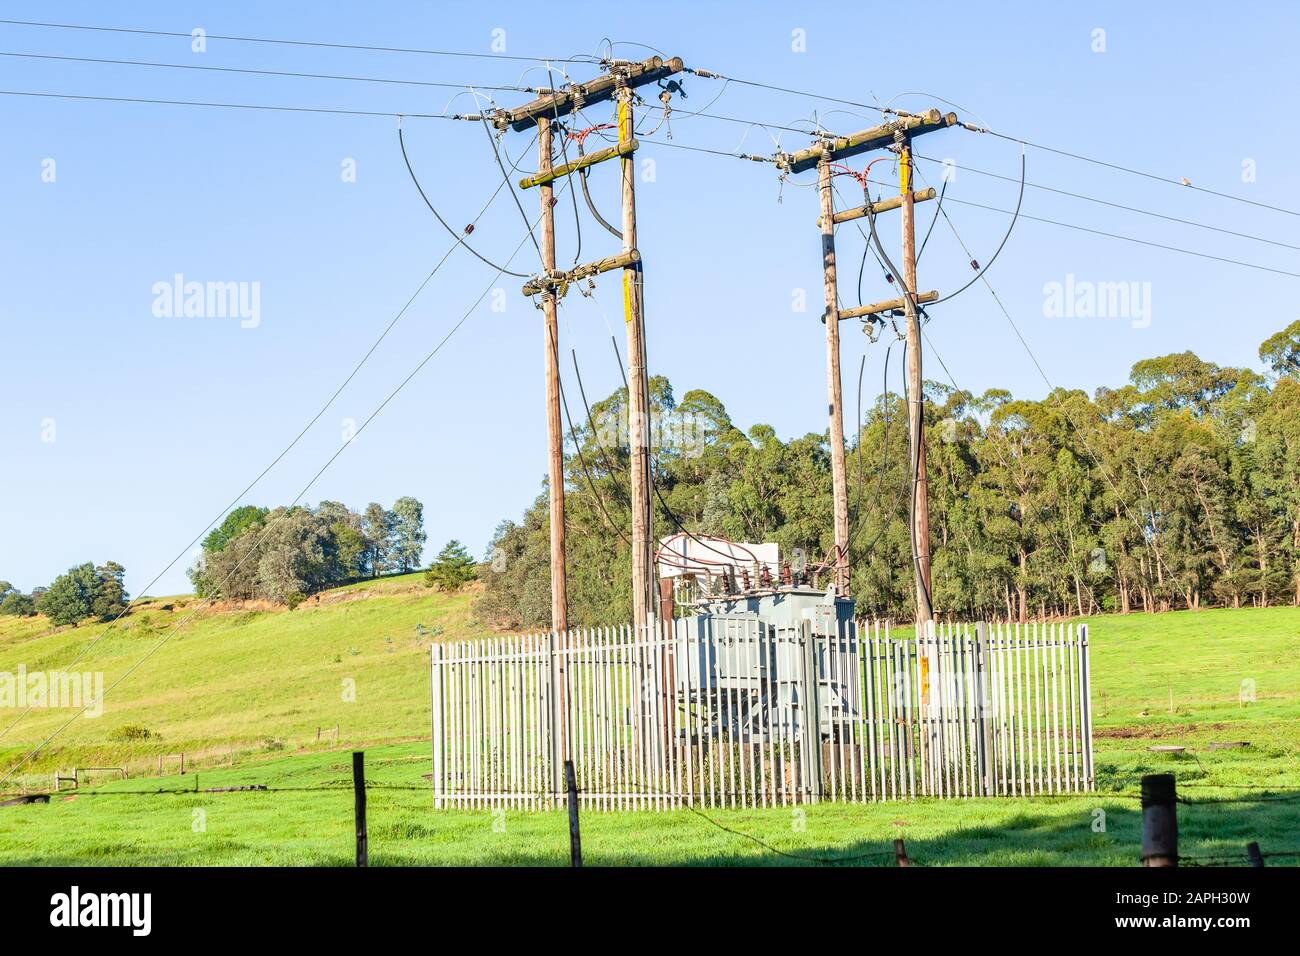 Electricity power transformer unit with secure fencing around unit connectors power lines on wood poles in summer morning rural field farmlands summer Stock Photo